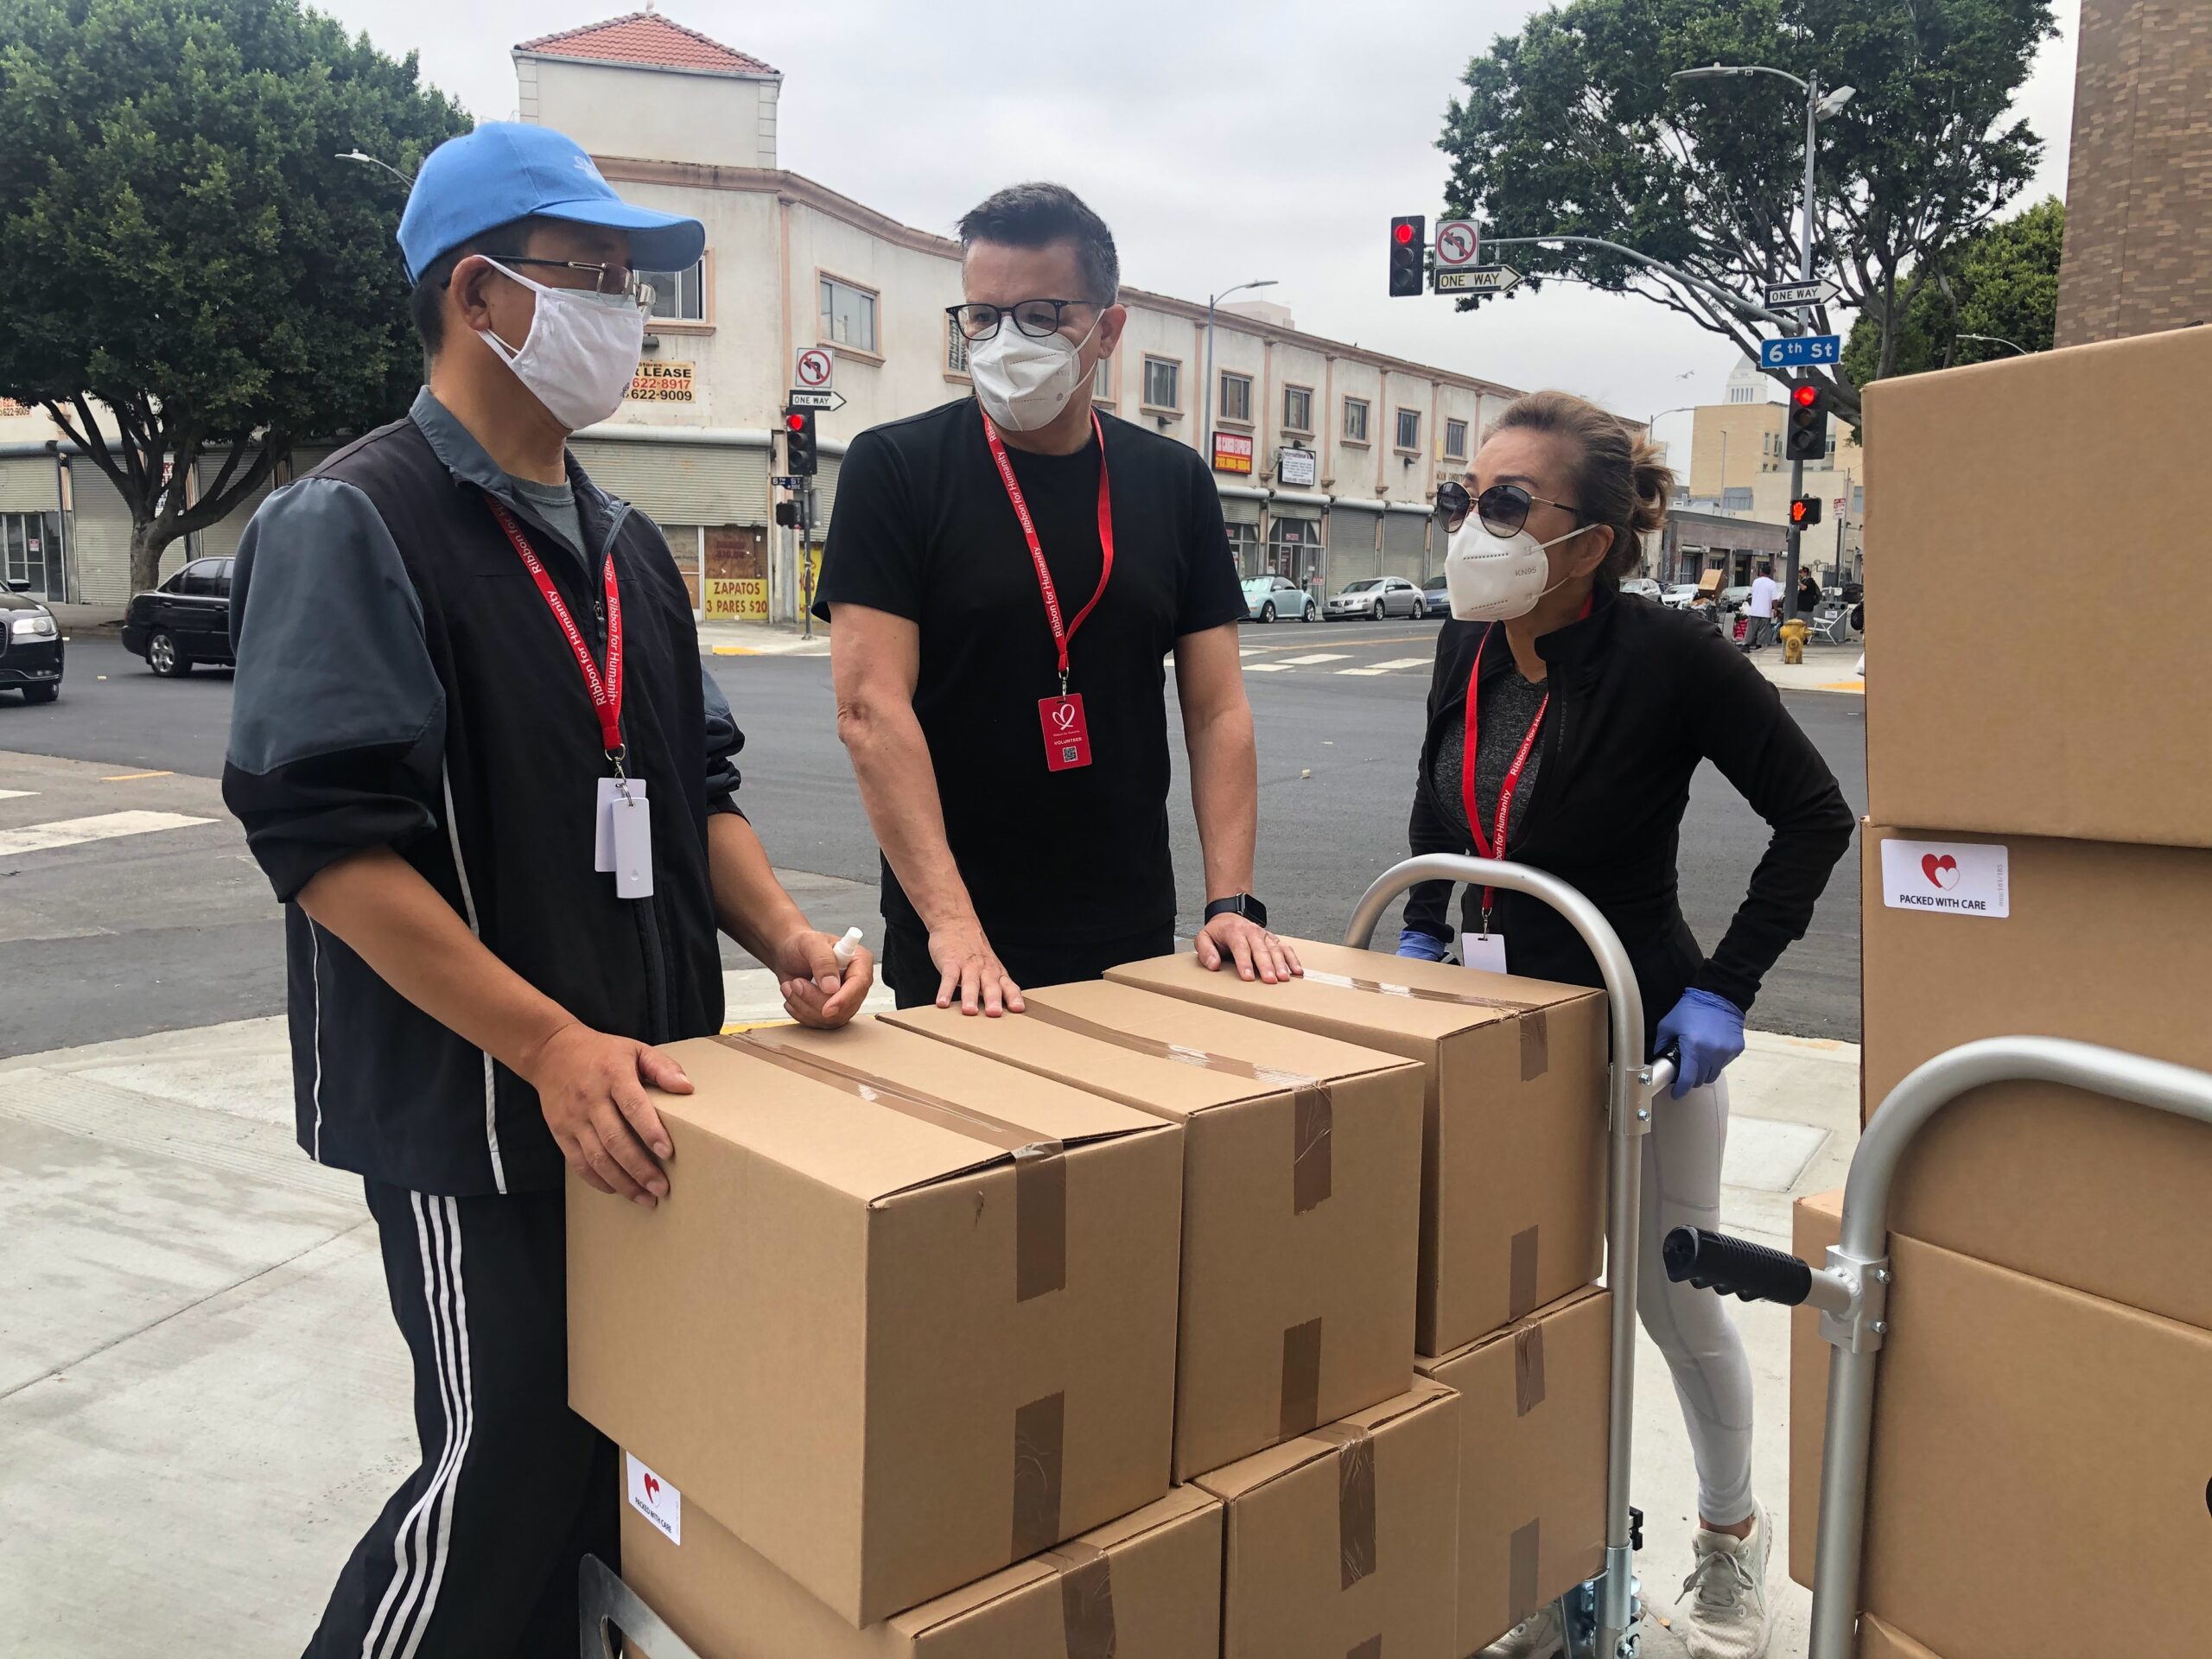 3 people in black shirts standing next to a trolly with boxes.